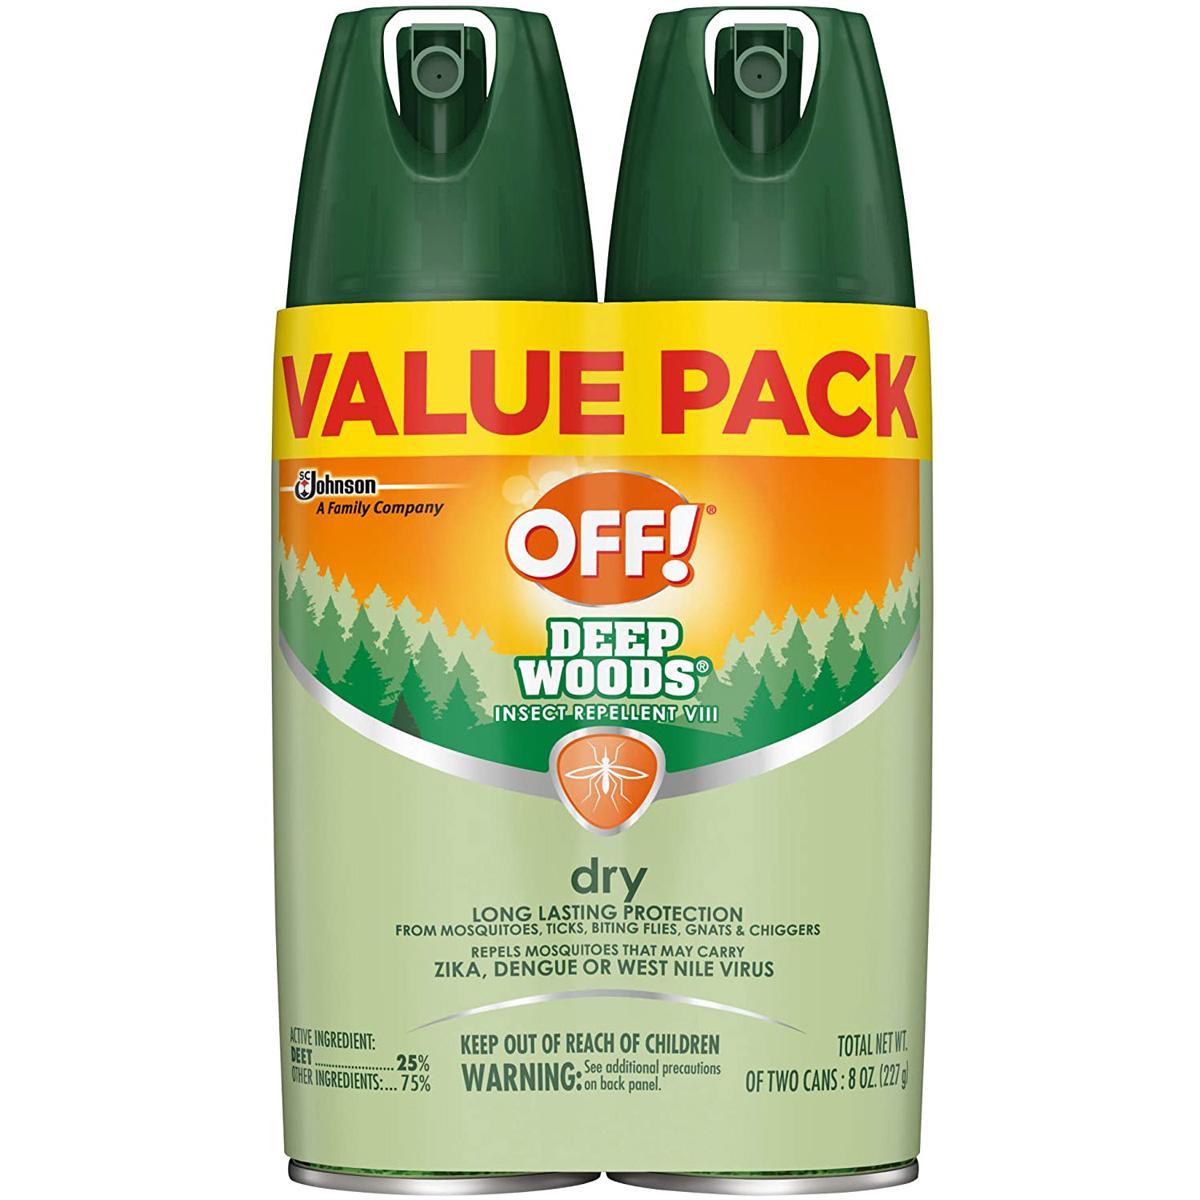 2 Cans OFF Deep Woods Insect Repellent VIII Drytouch Spray for $5.60 Shipped